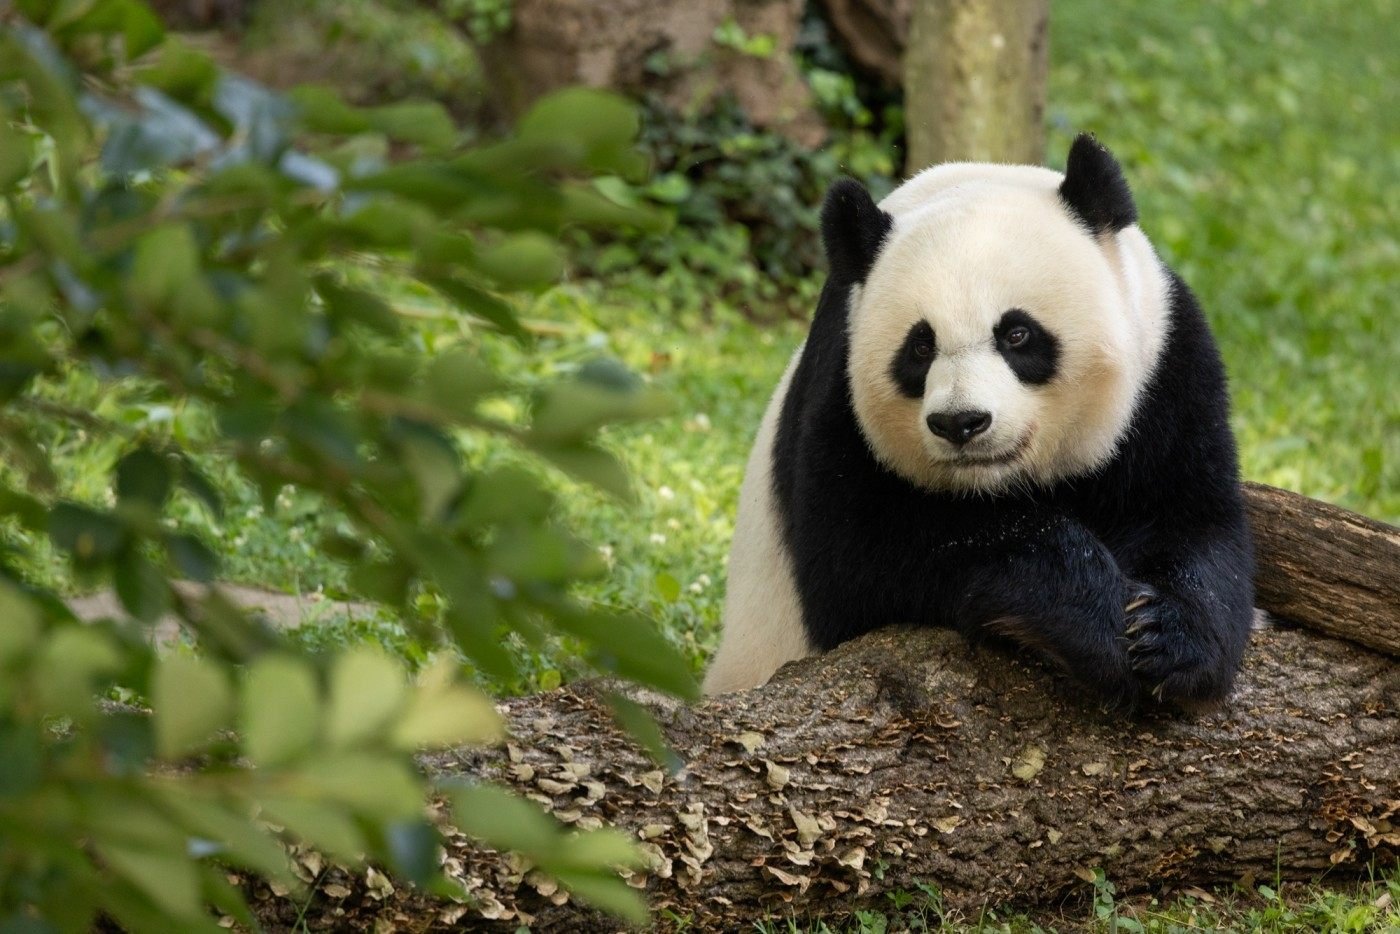 Giant panda Mei Xiang at her 25th birthday celebration at the National Zoo in Washington on July 22. Photo: Smithsonian’s National Zoo and Conservation Biology Institute